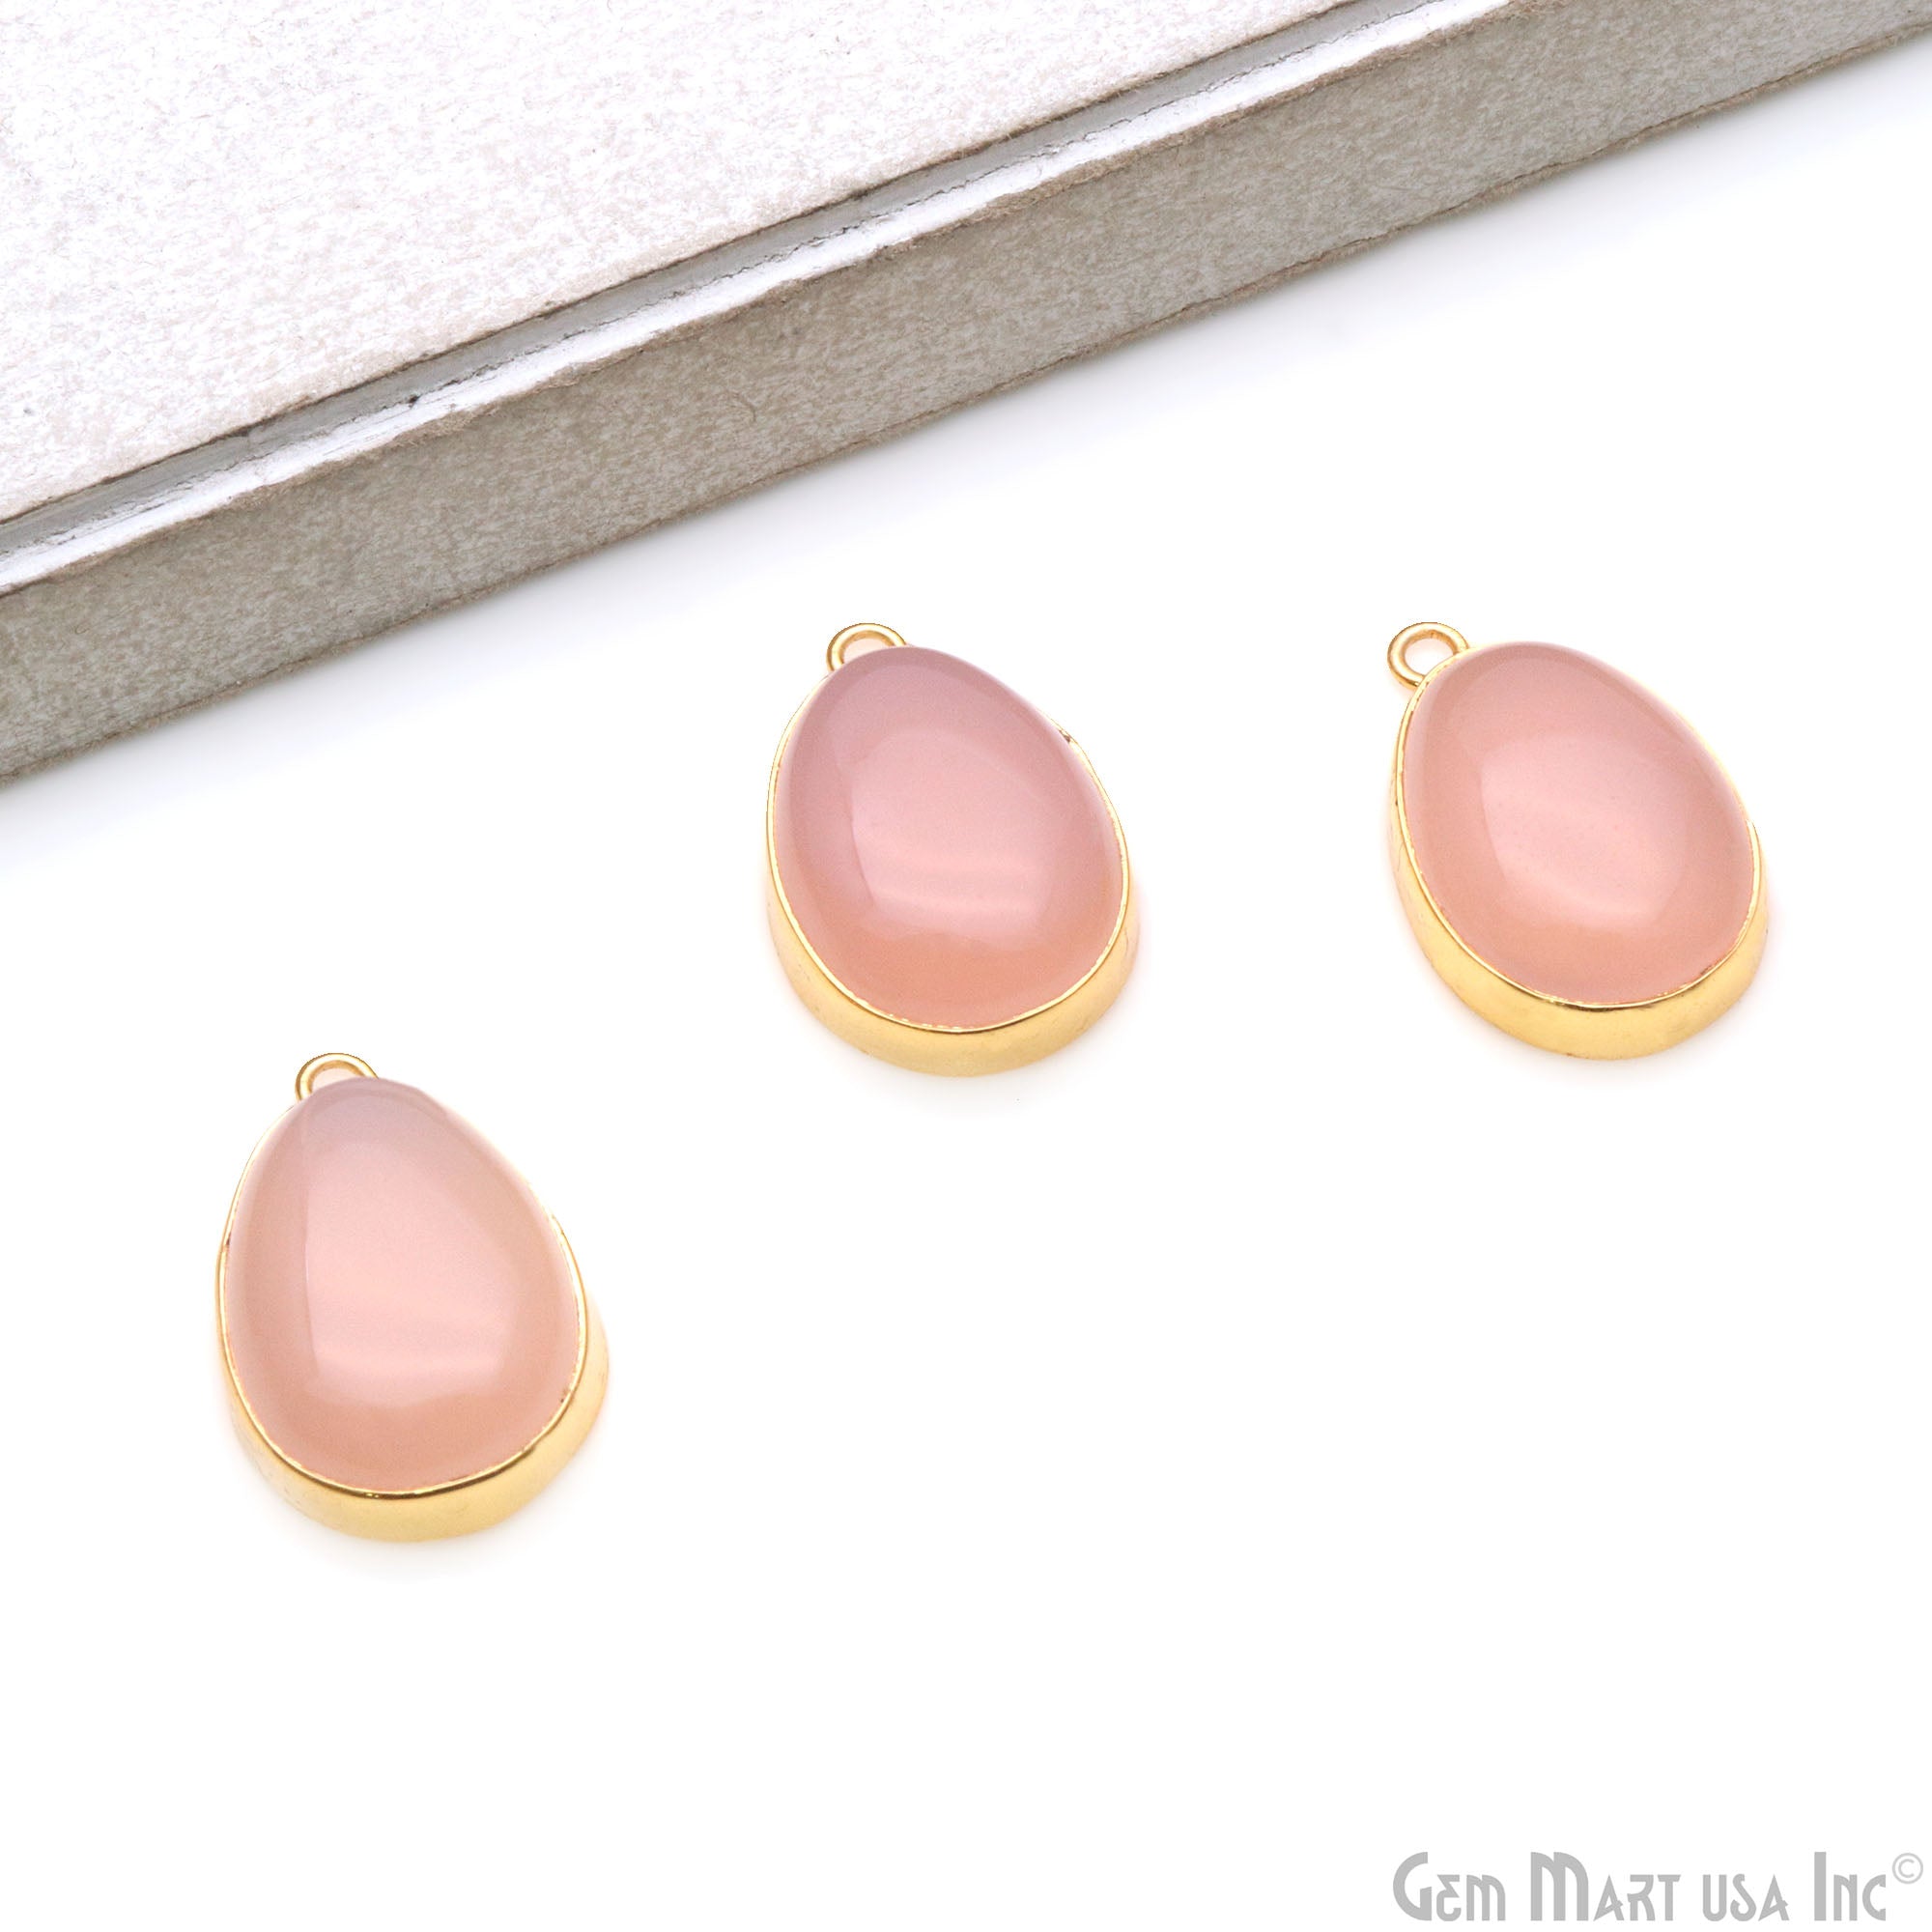 Cabochon Free Form Gold Plated 23x17mm Single Bail Gemstone Connector